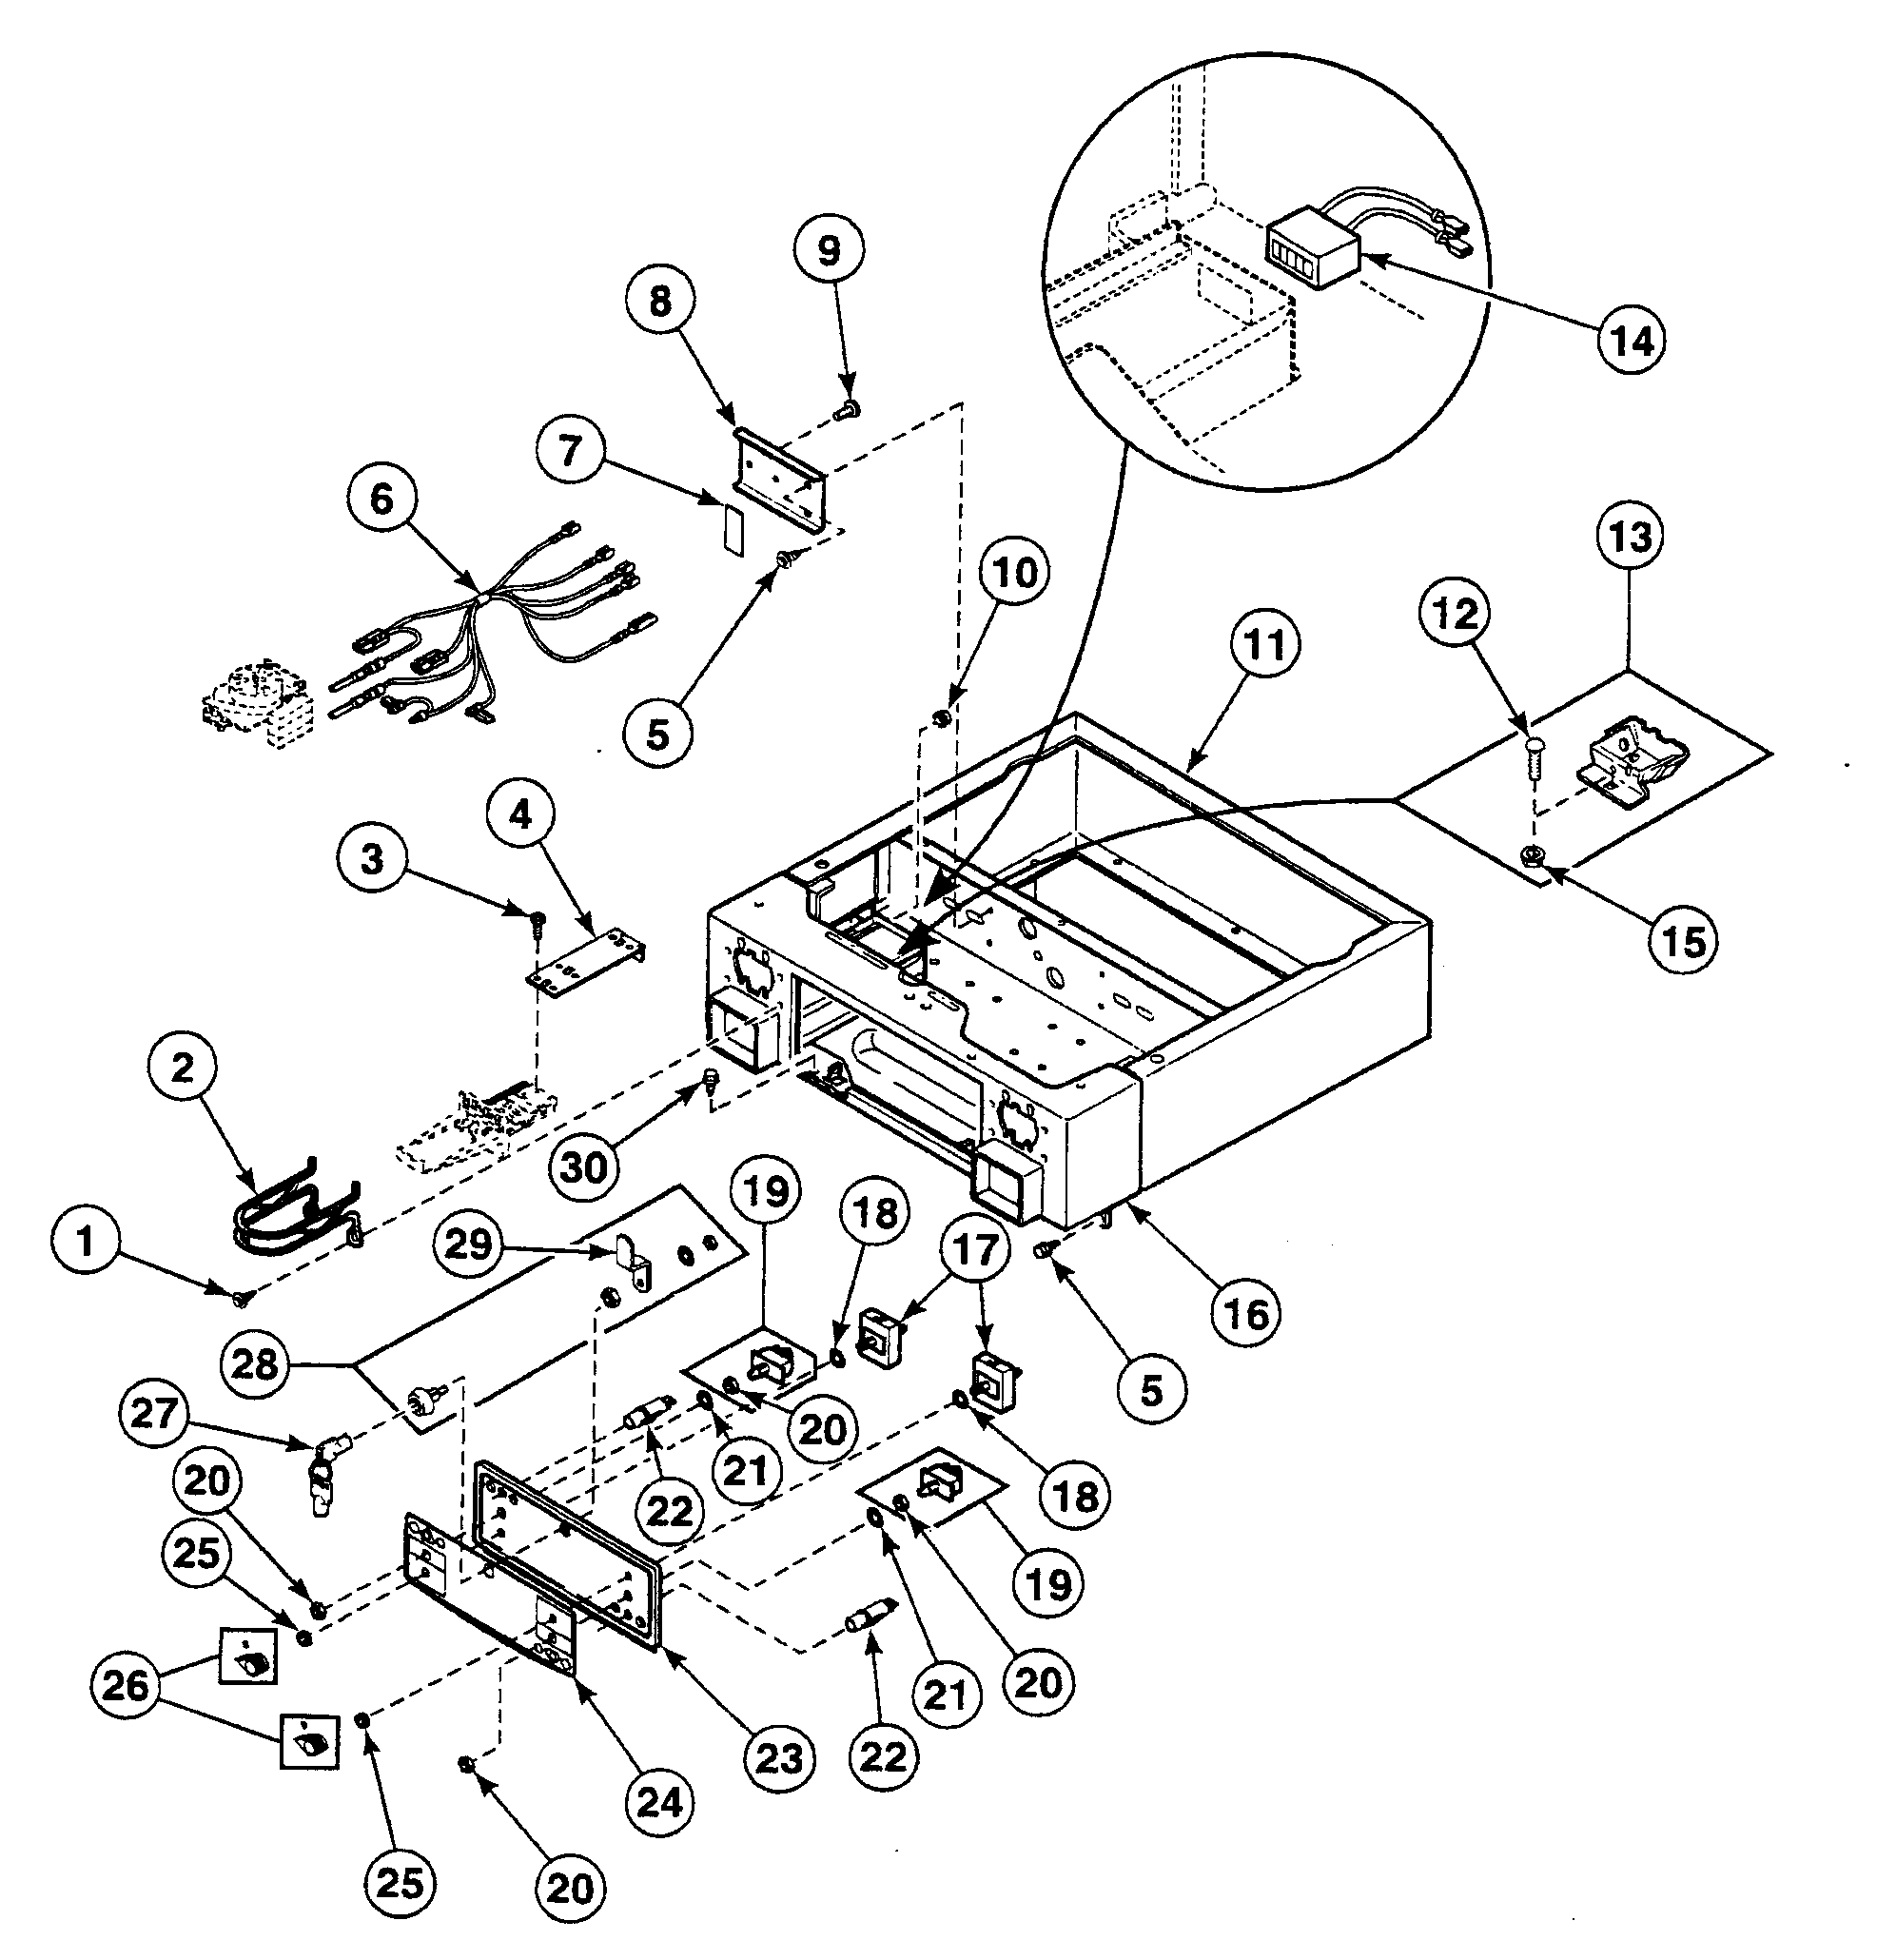 Whirlpool Dryer Plug Wiring Diagram from c.searspartsdirect.com